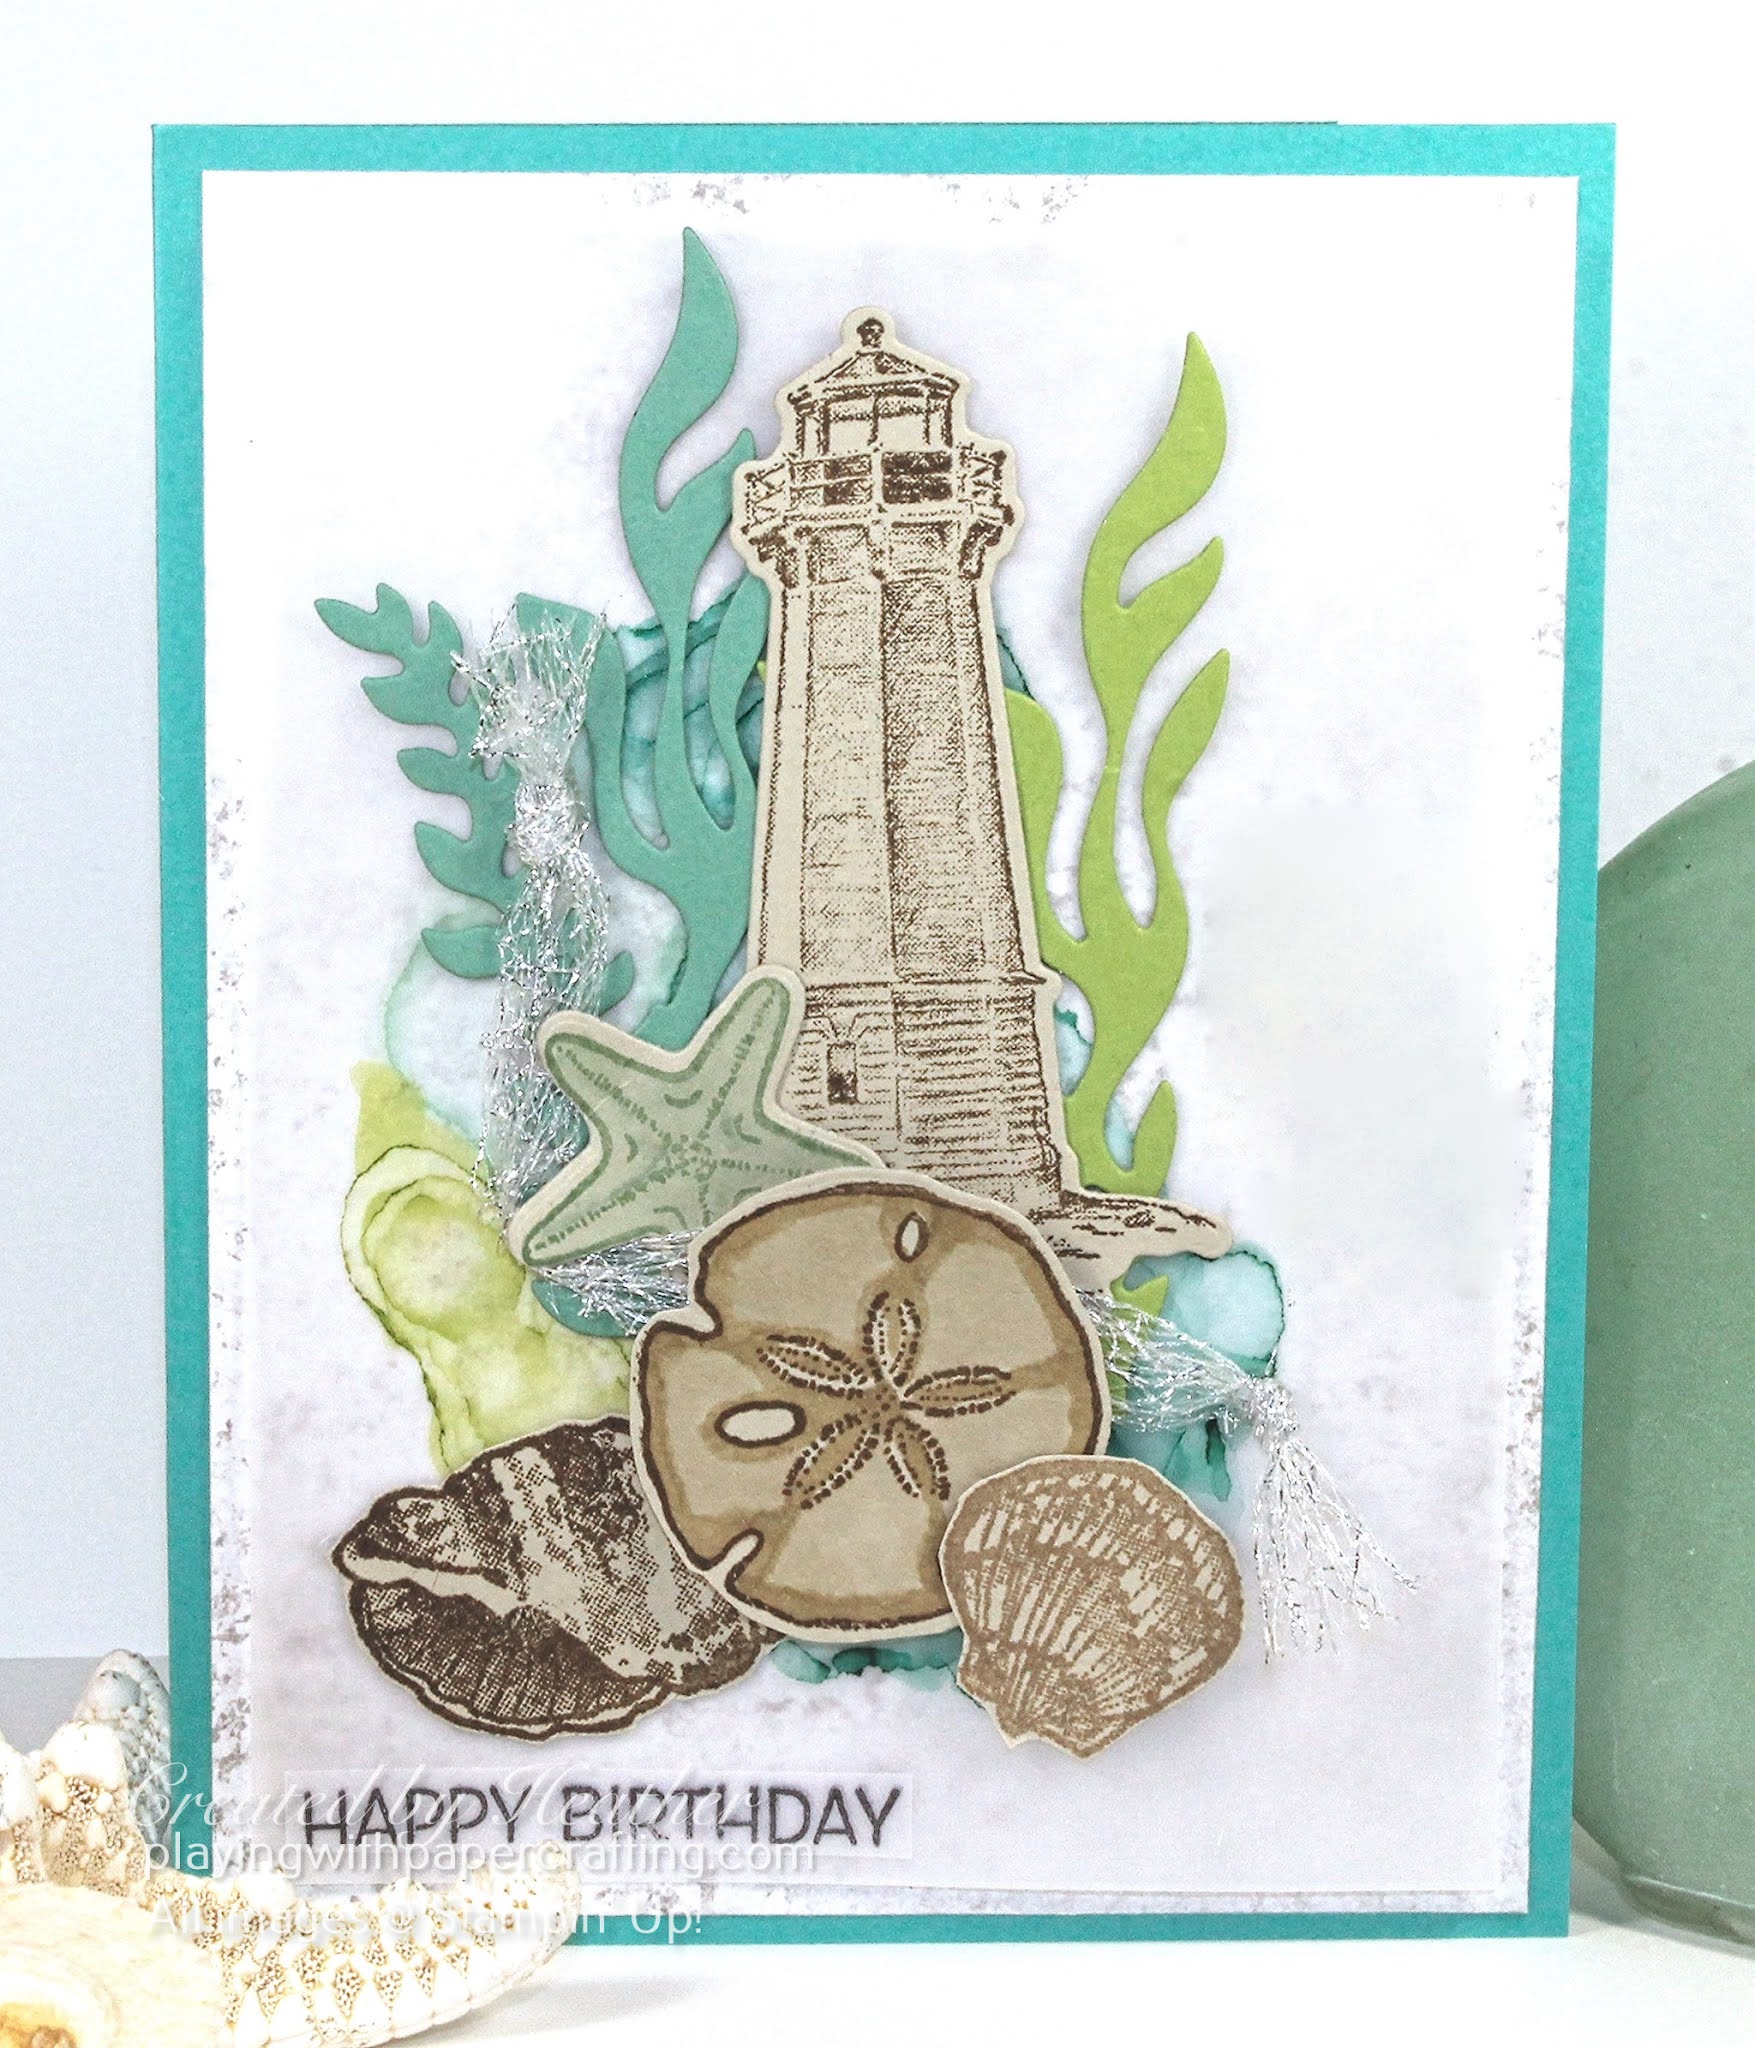 Playing with Papercrafting: Happy Birthday with Seashells and